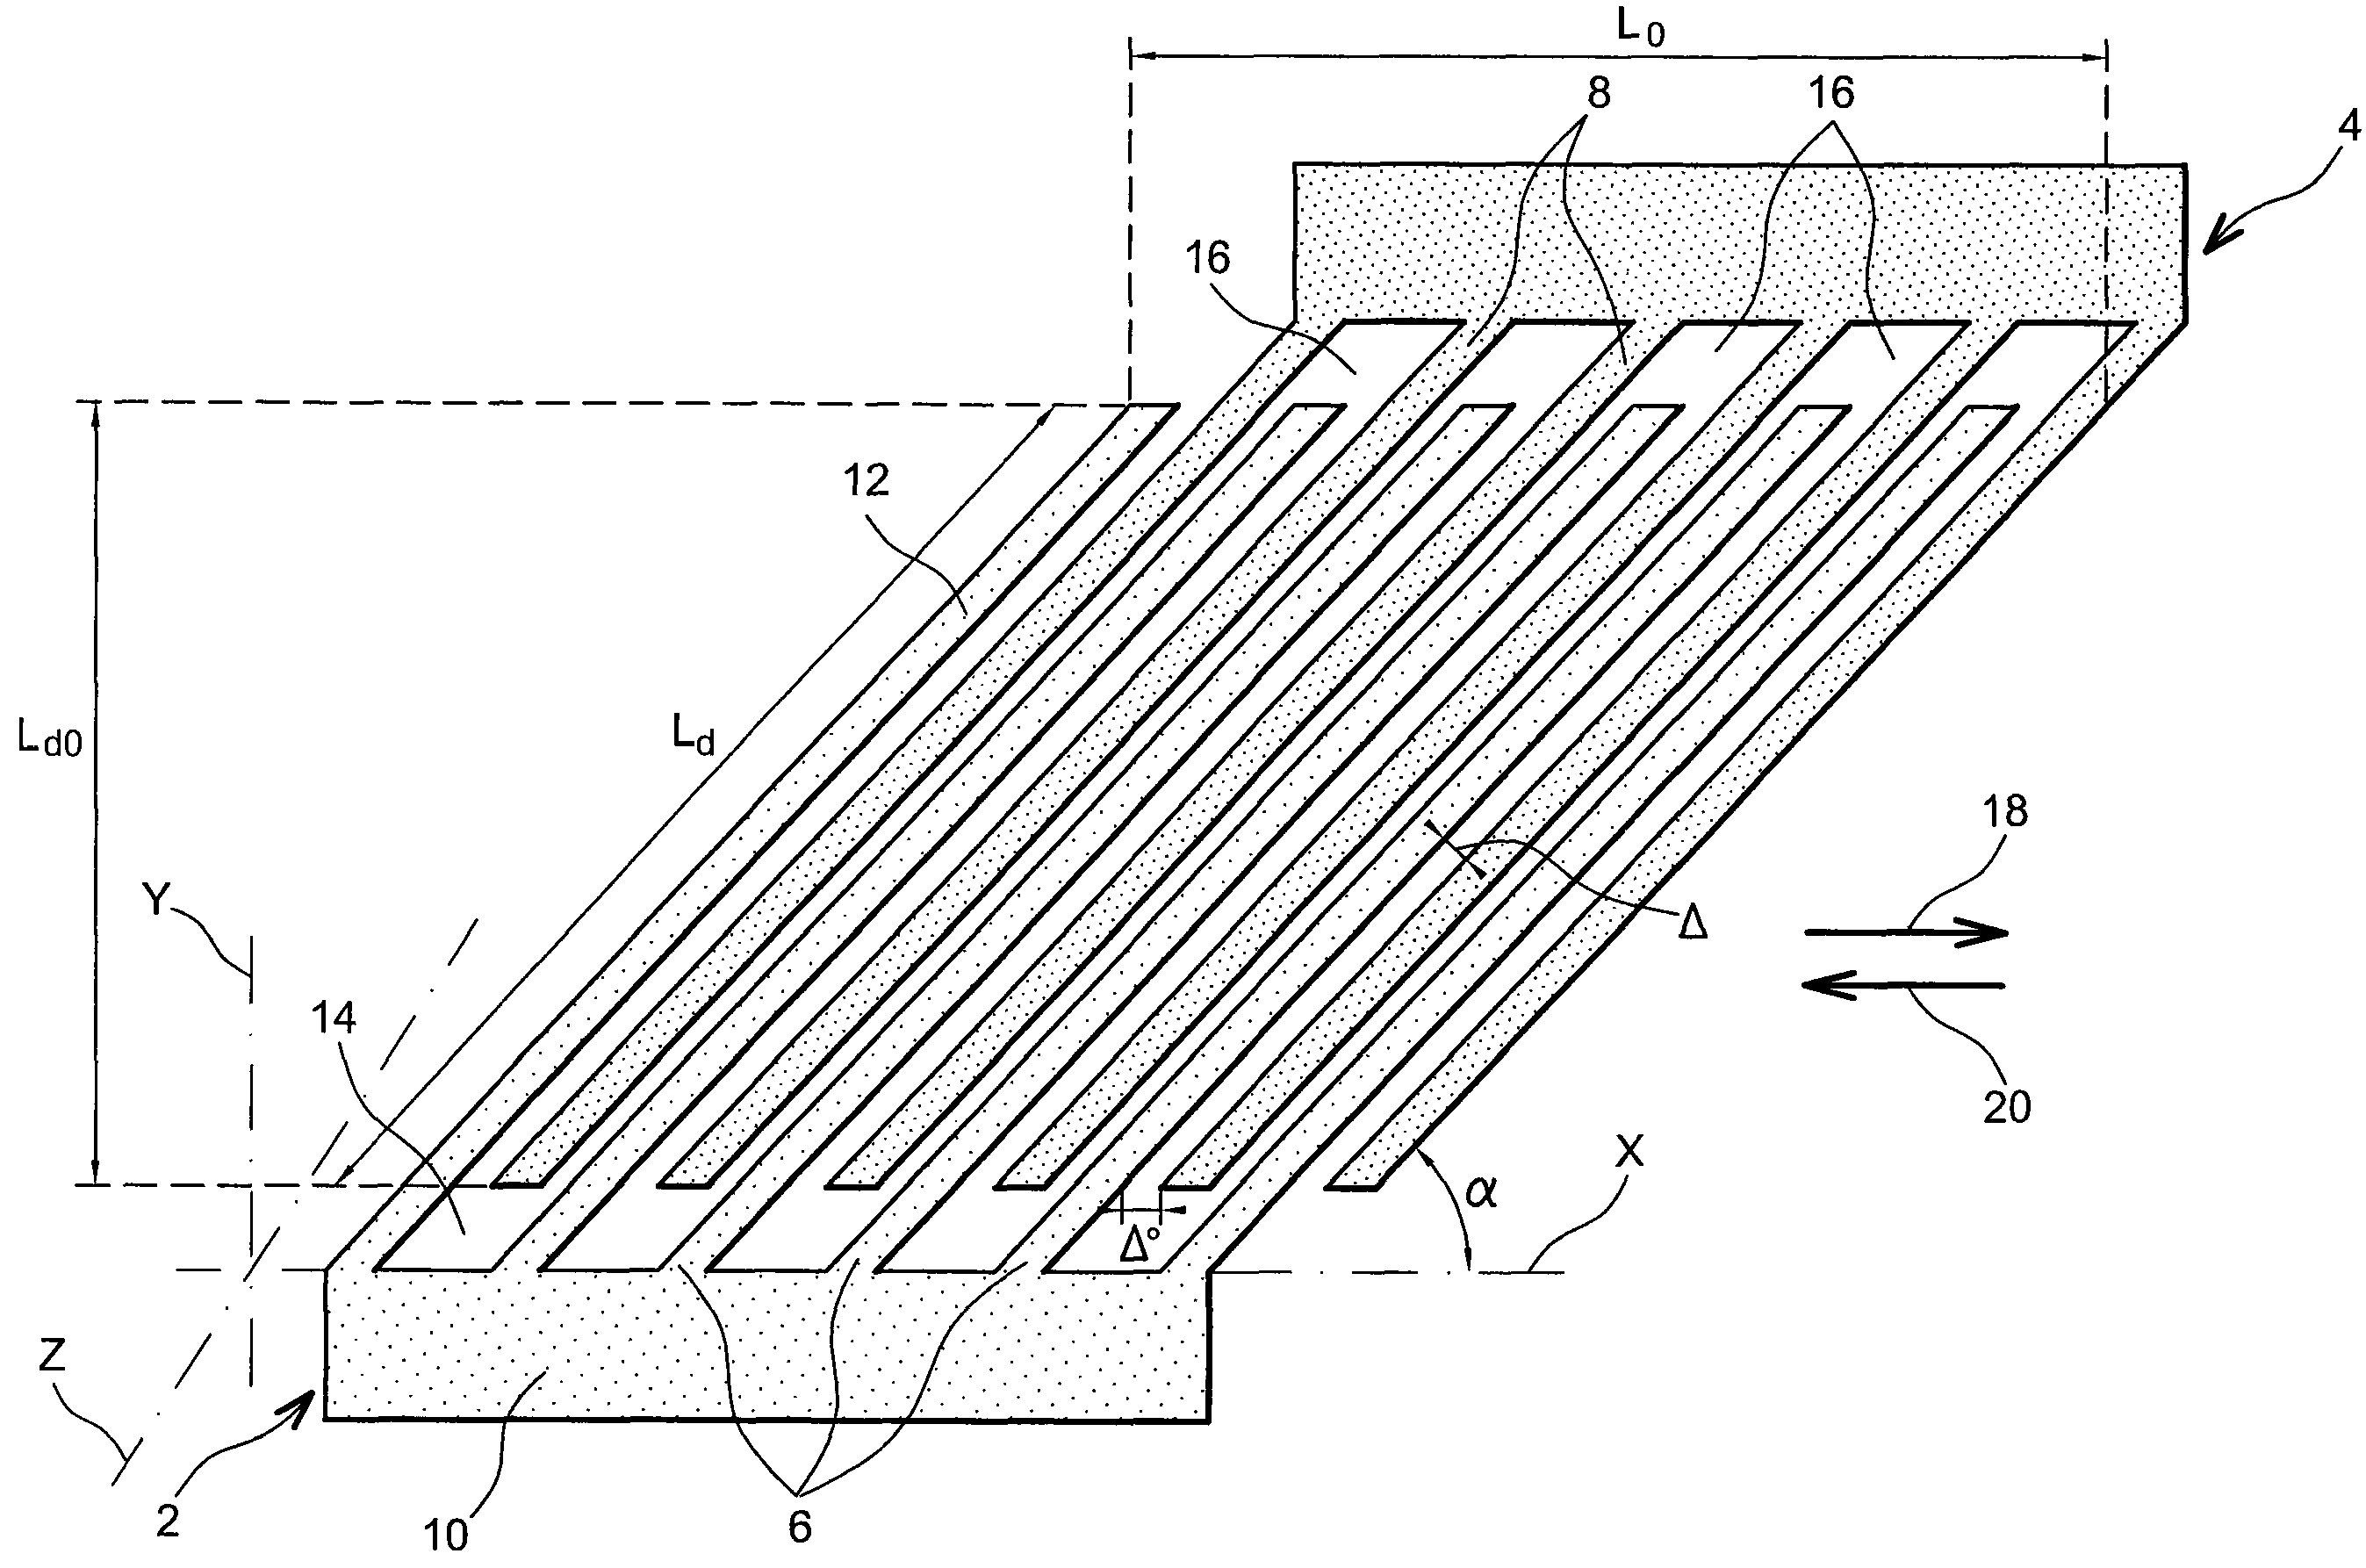 Device with optimised capacitive volume